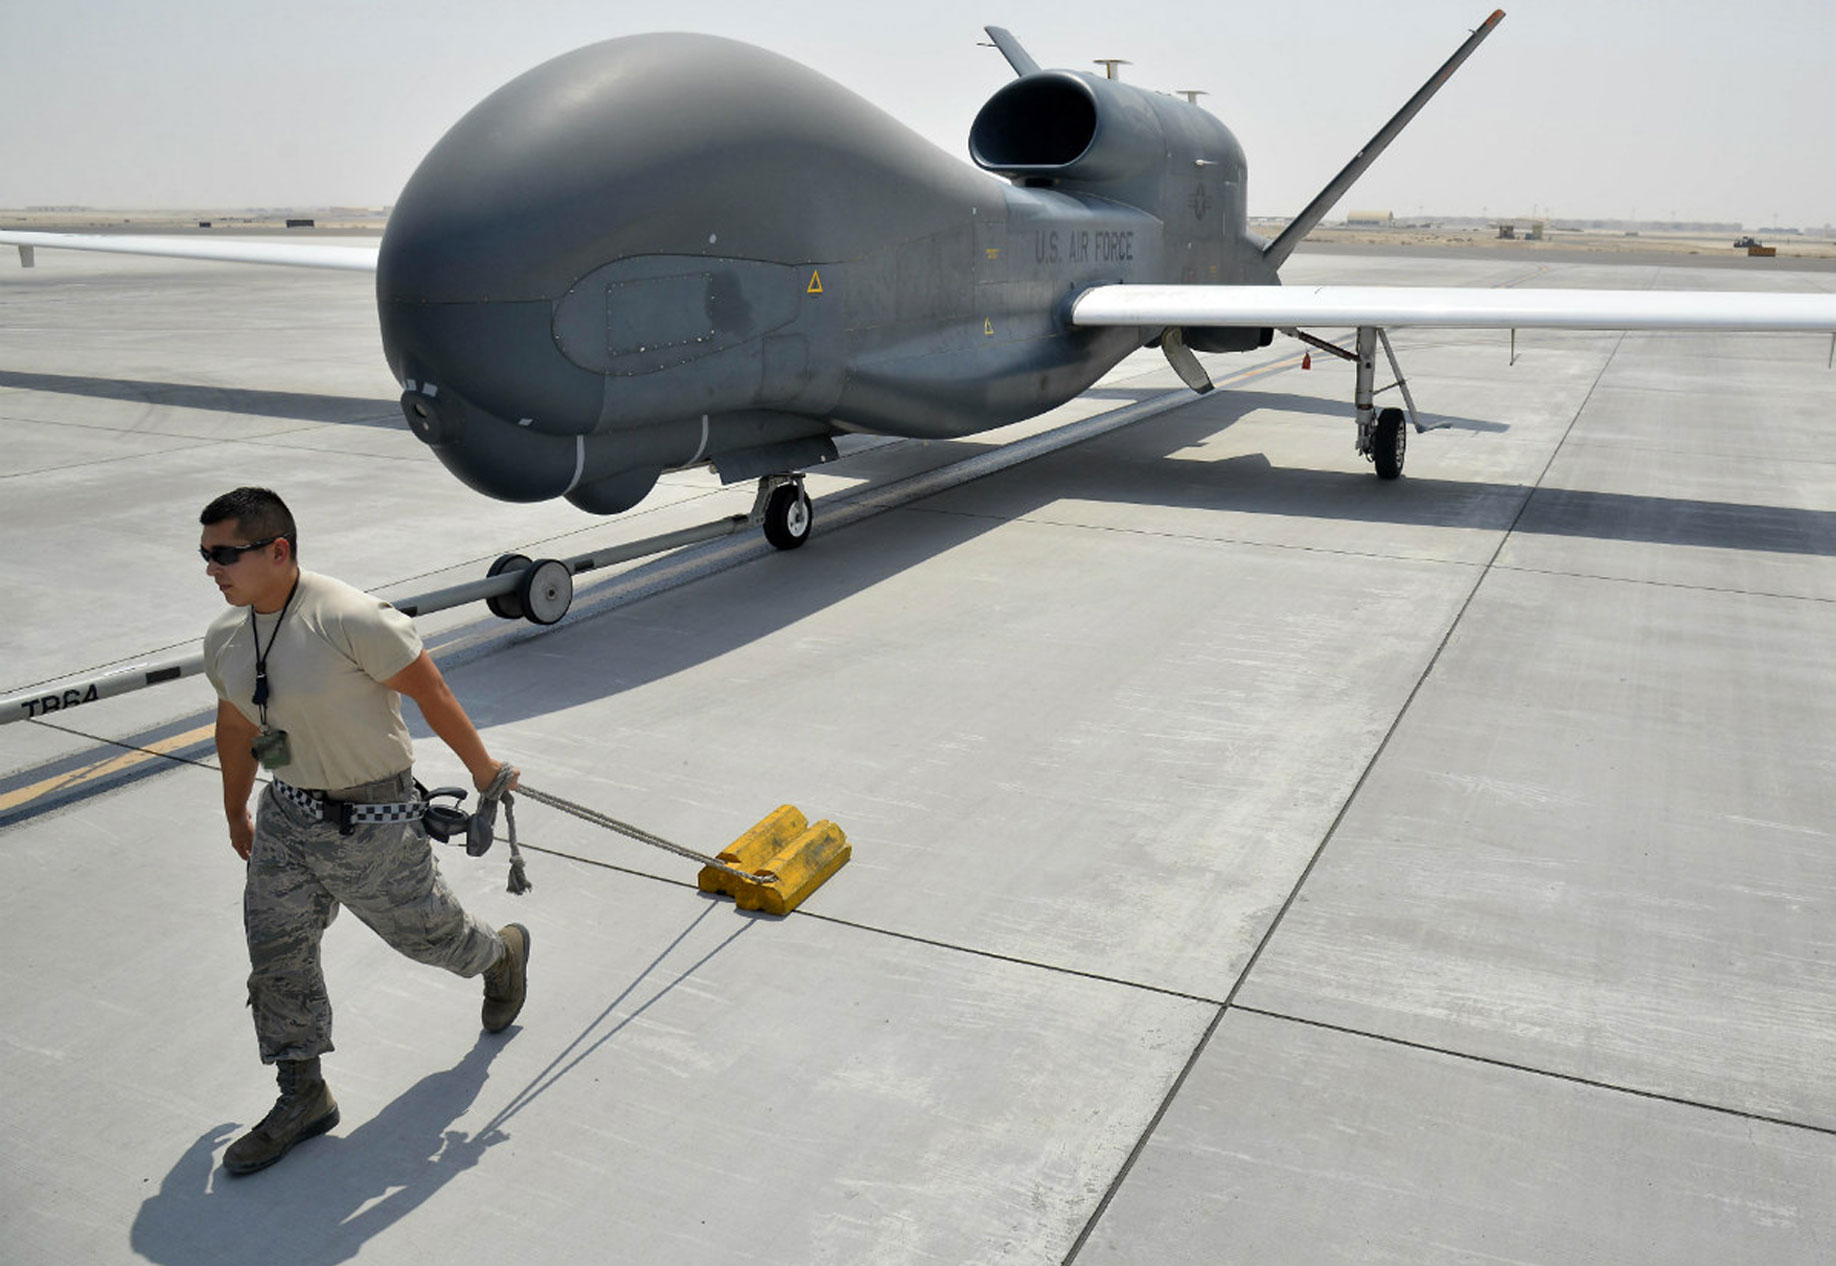 Incredible US Military Drone Images, Photos & Pictures